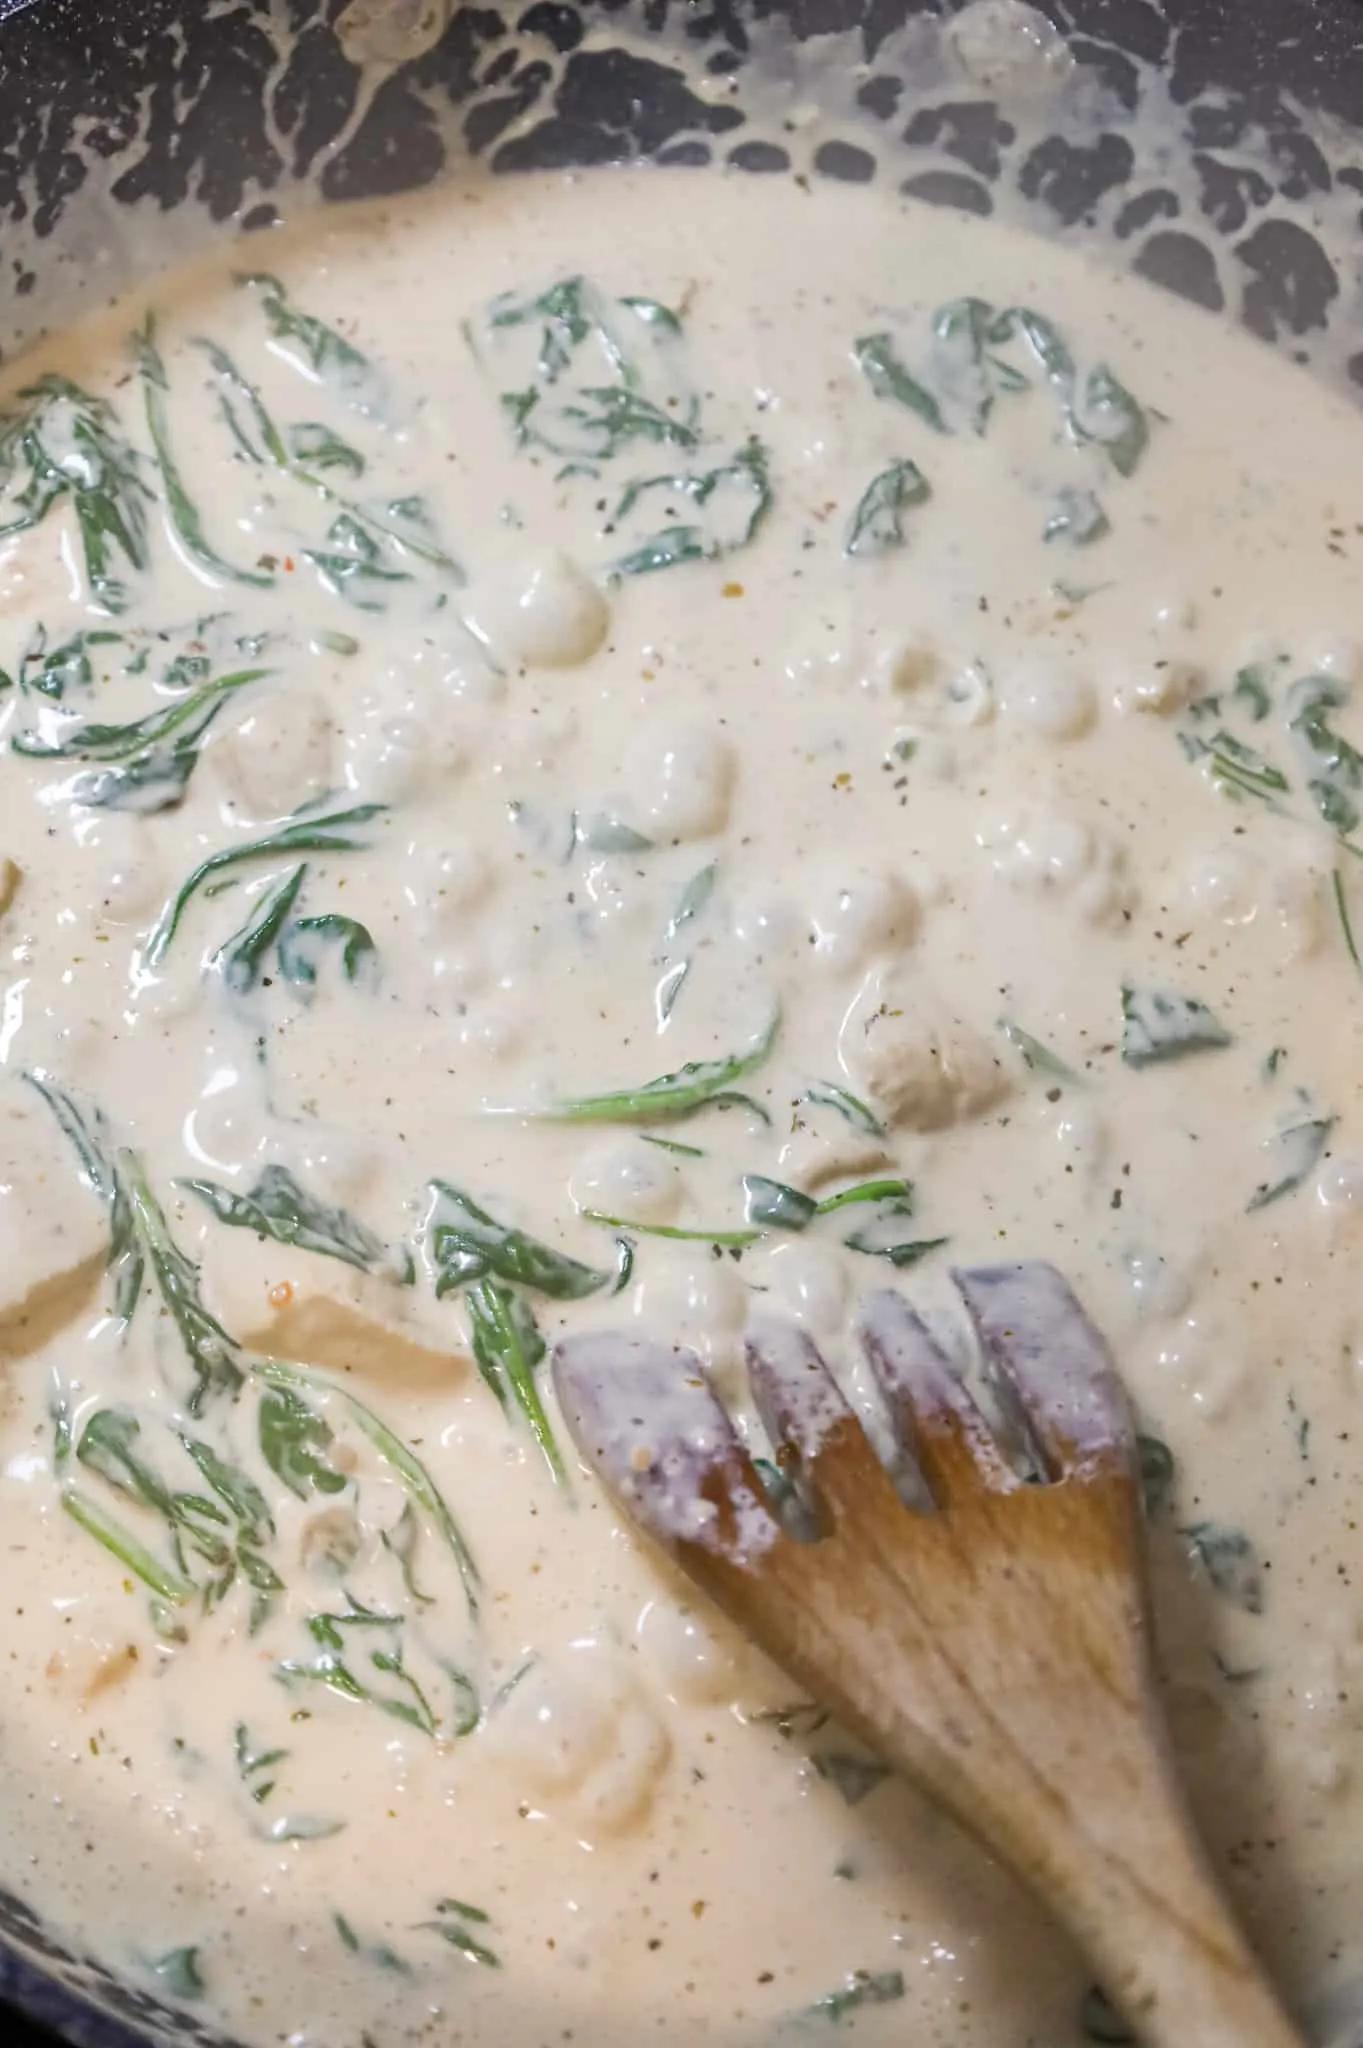 spinach wilting in alfredo sauce in a skillet